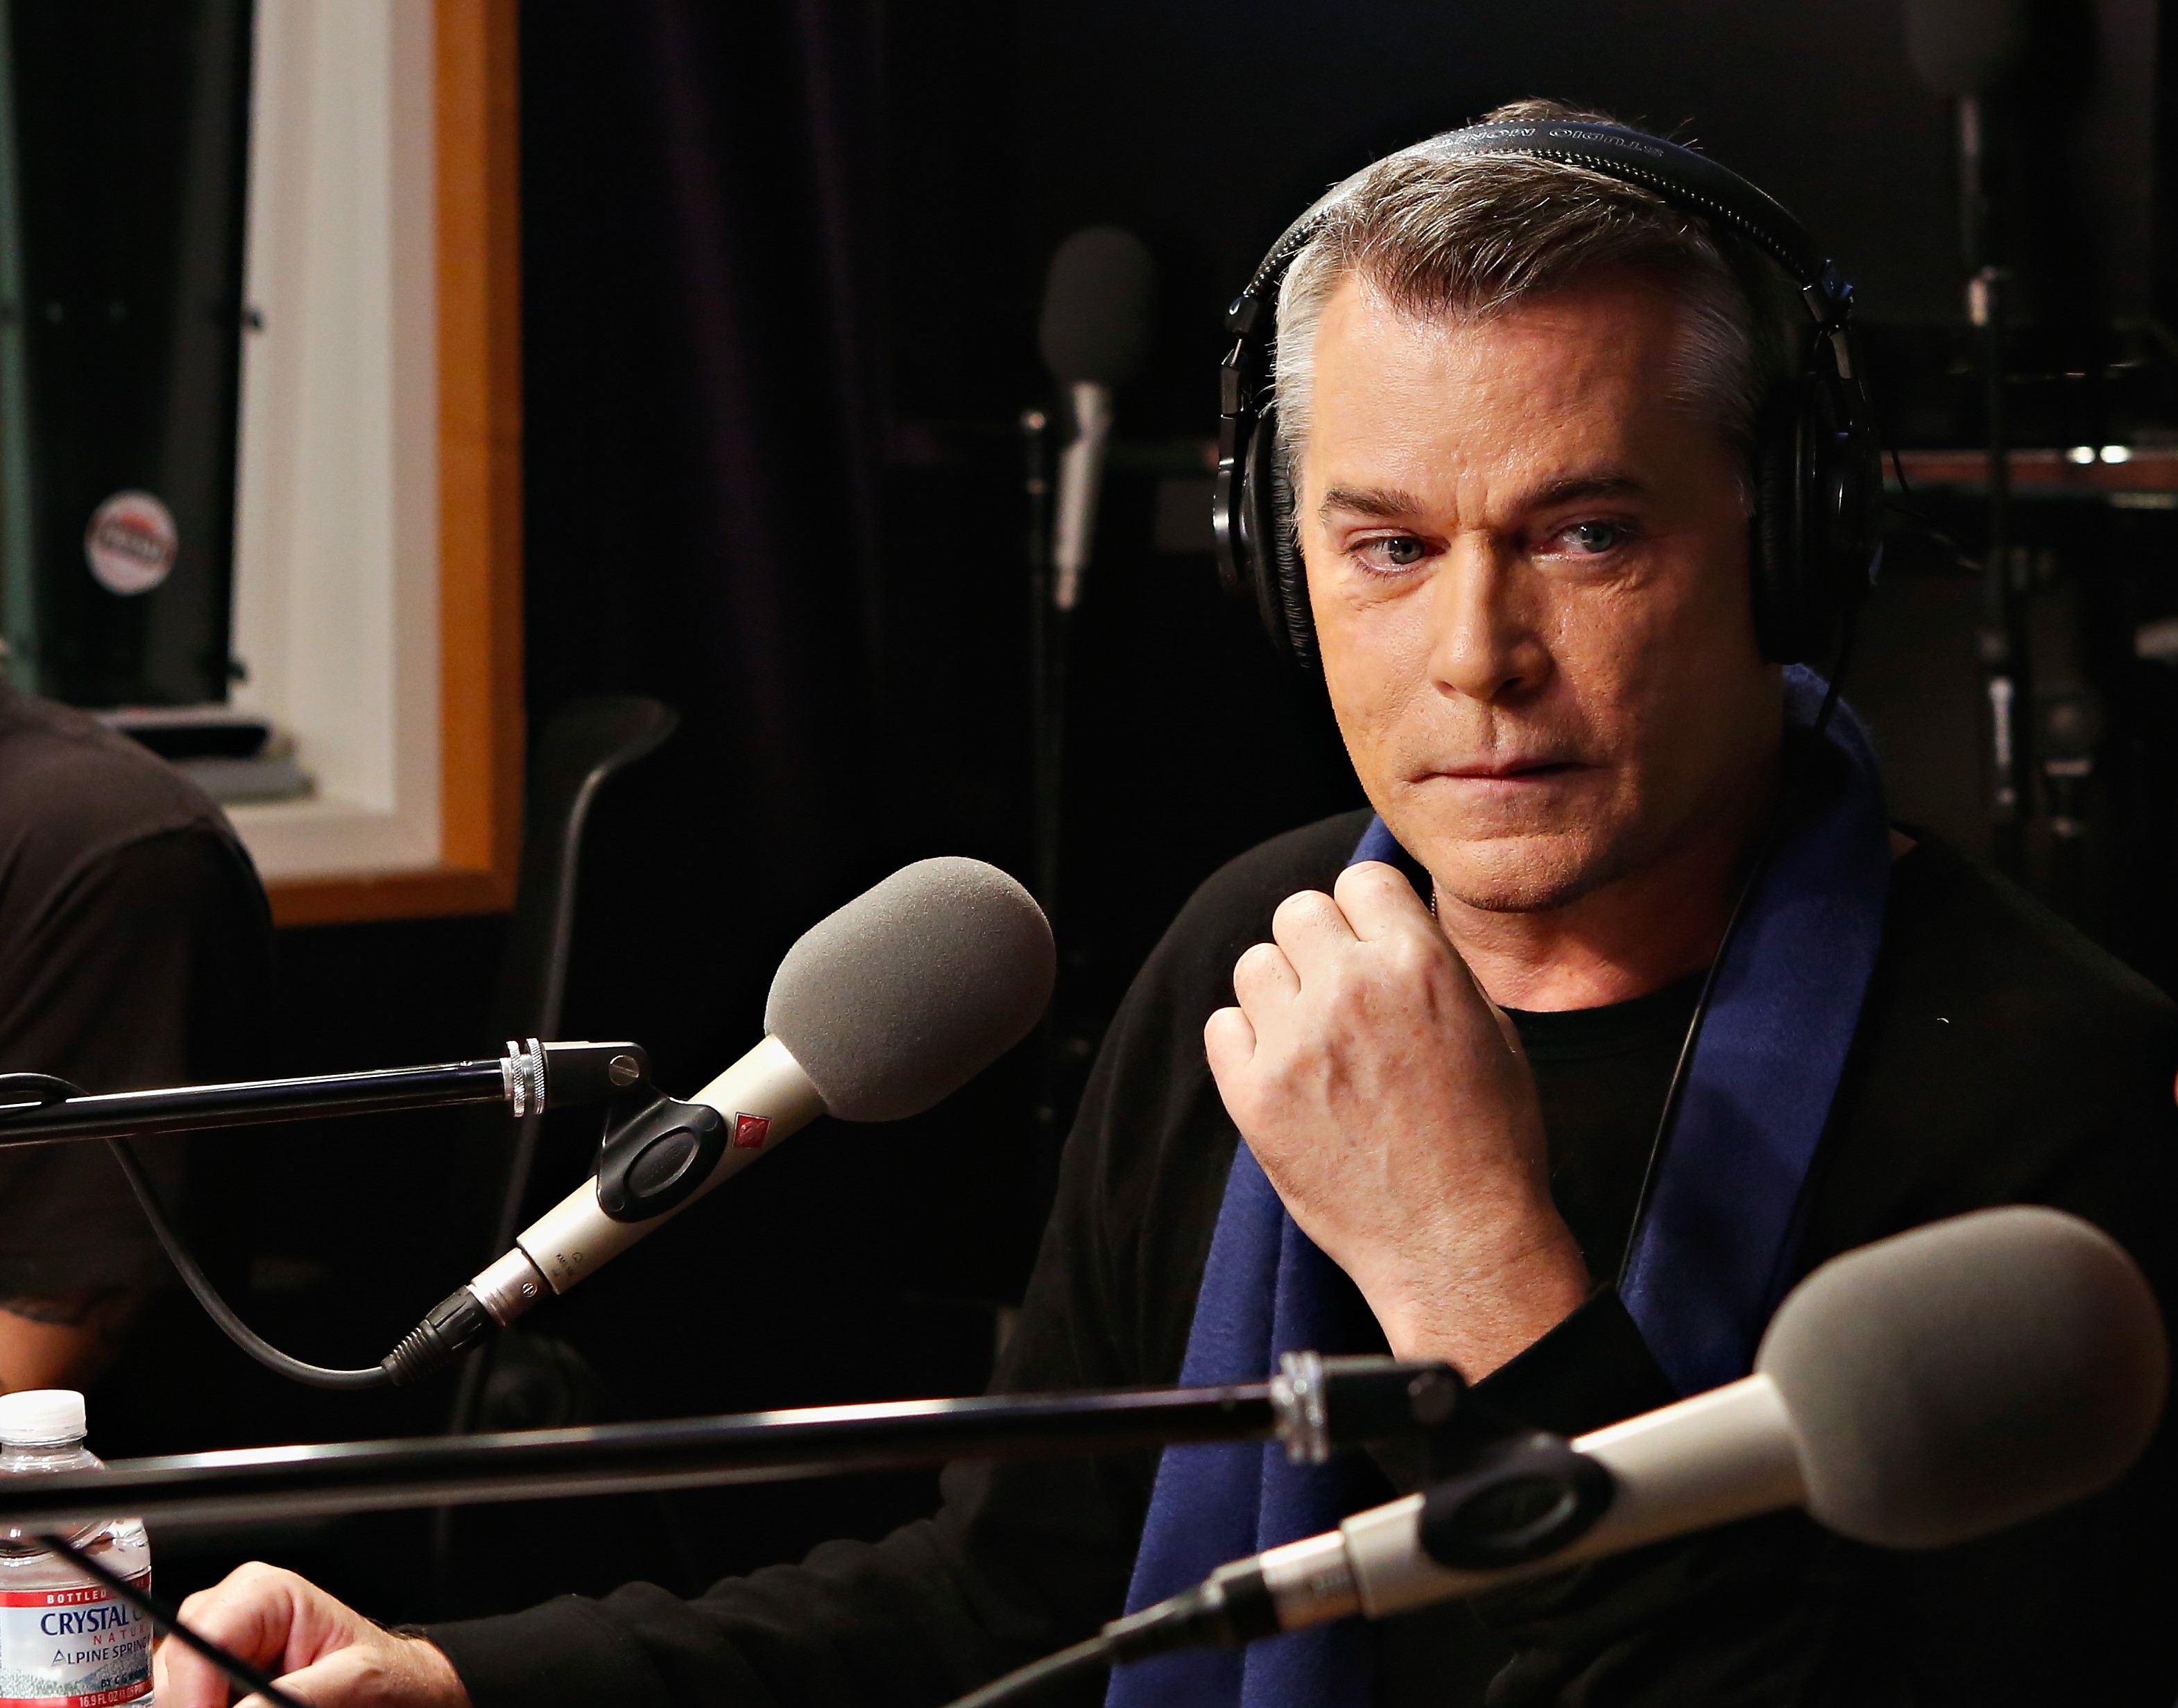 Ray Liotta visiting 'The Opie & Anthony Show' at the SiriusXM Studios